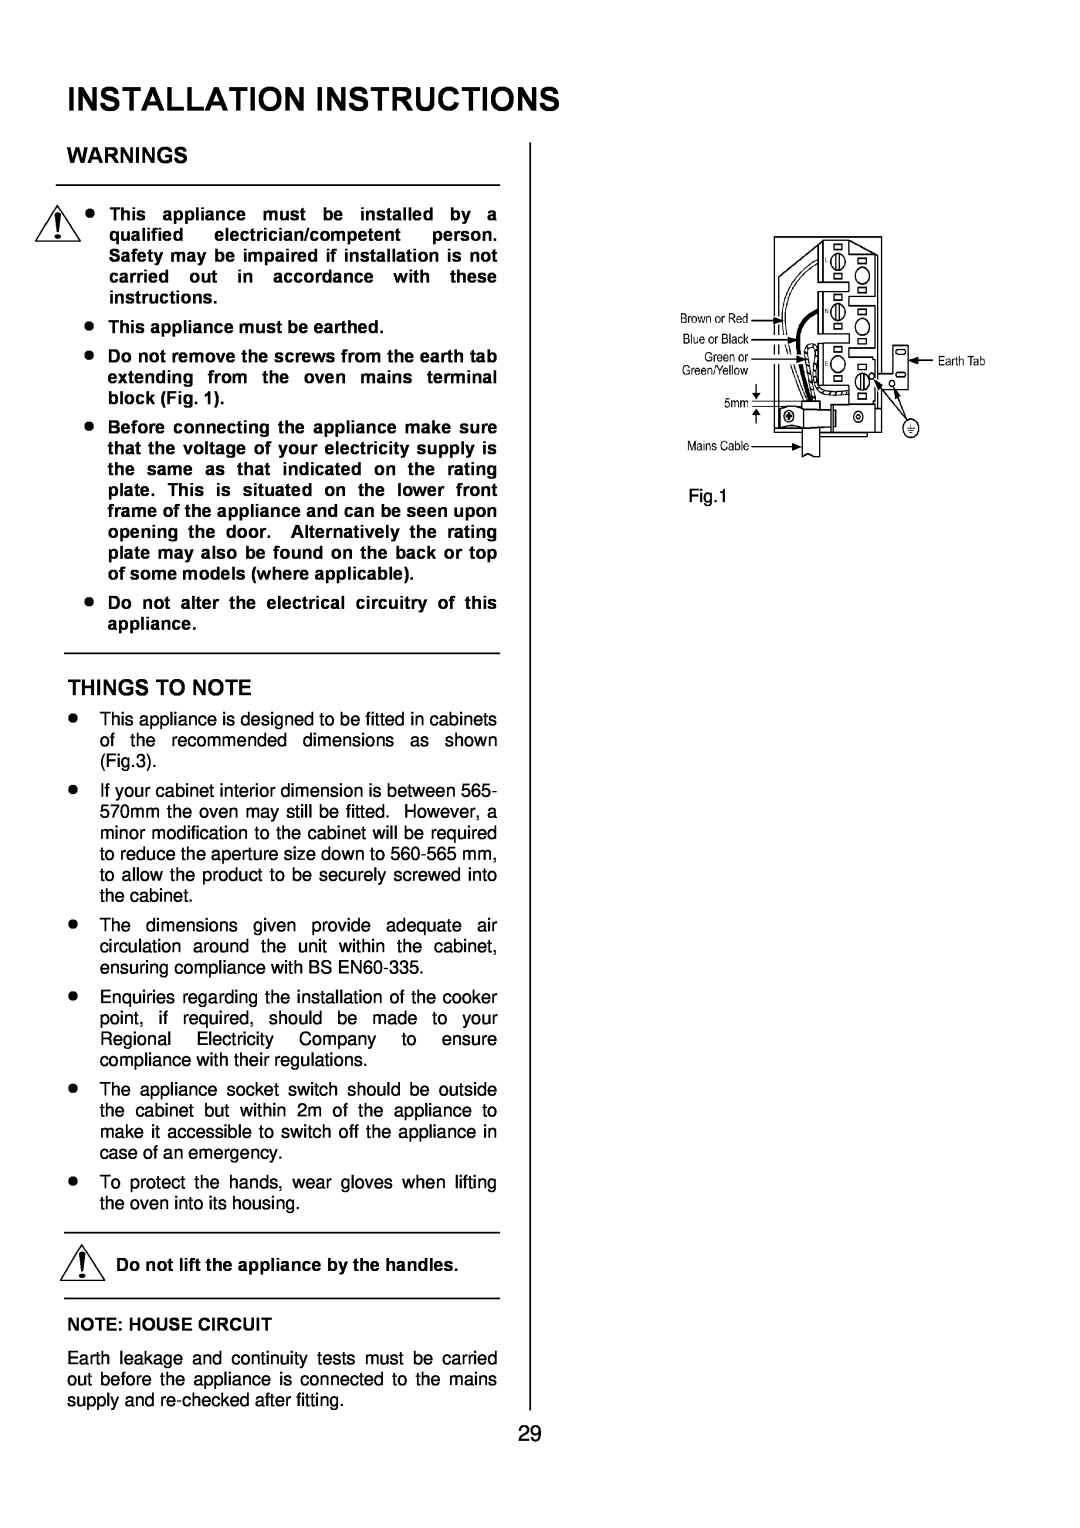 Zanussi ZOD 330 manual Installation Instructions, Warnings, Things To Note 